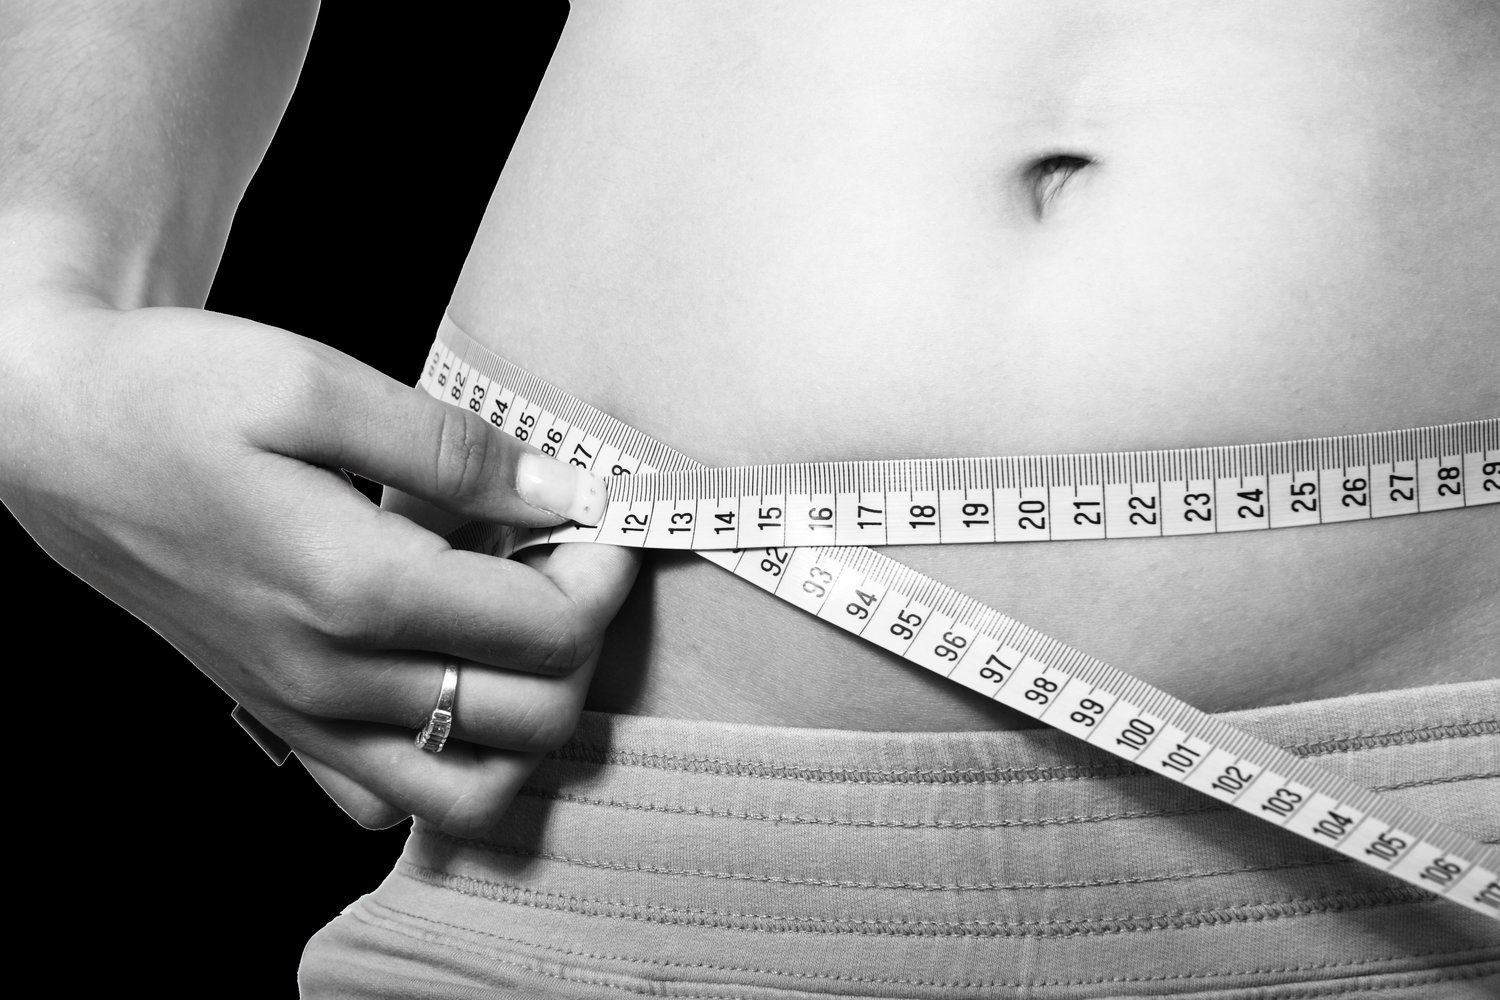 What's The Best Way To Track Weight Loss: A Measuring Tape Or Scale?